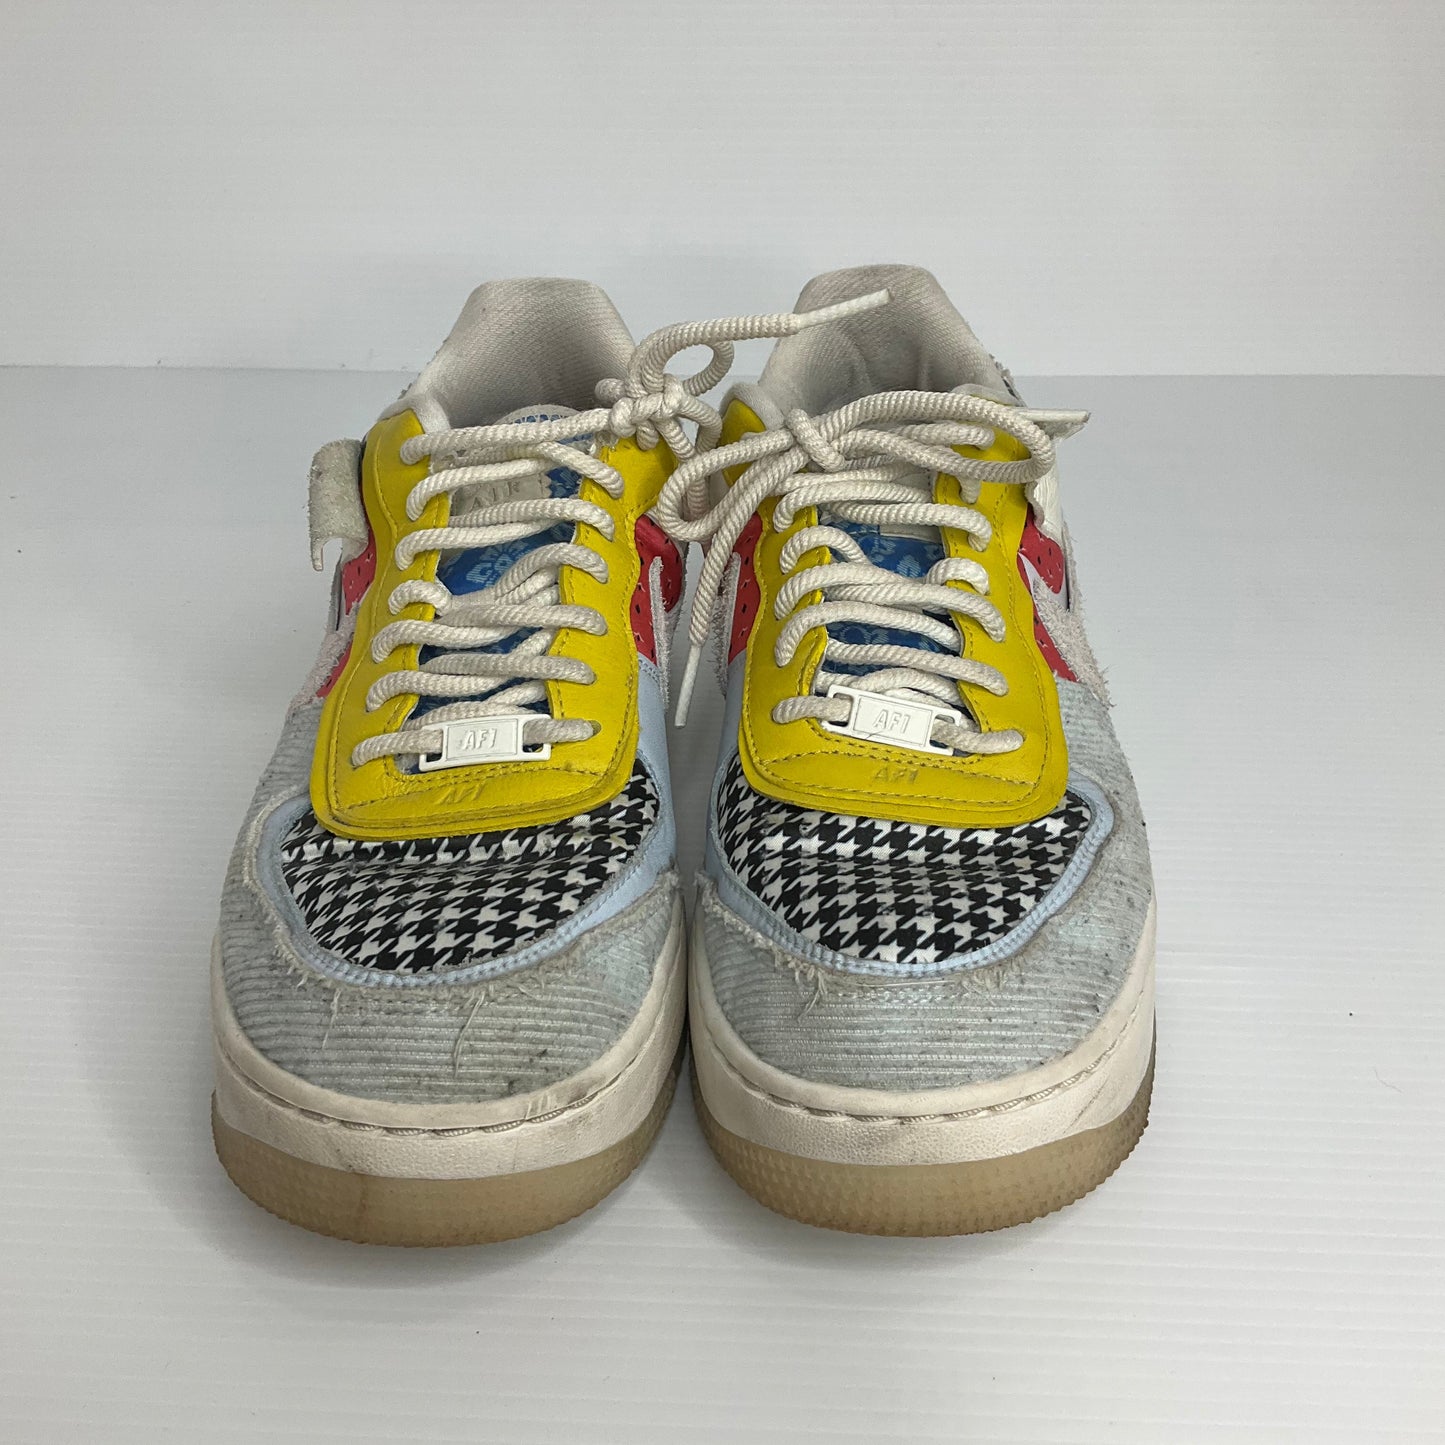 Multi-colored Shoes Sneakers Platform Nike, Size 11